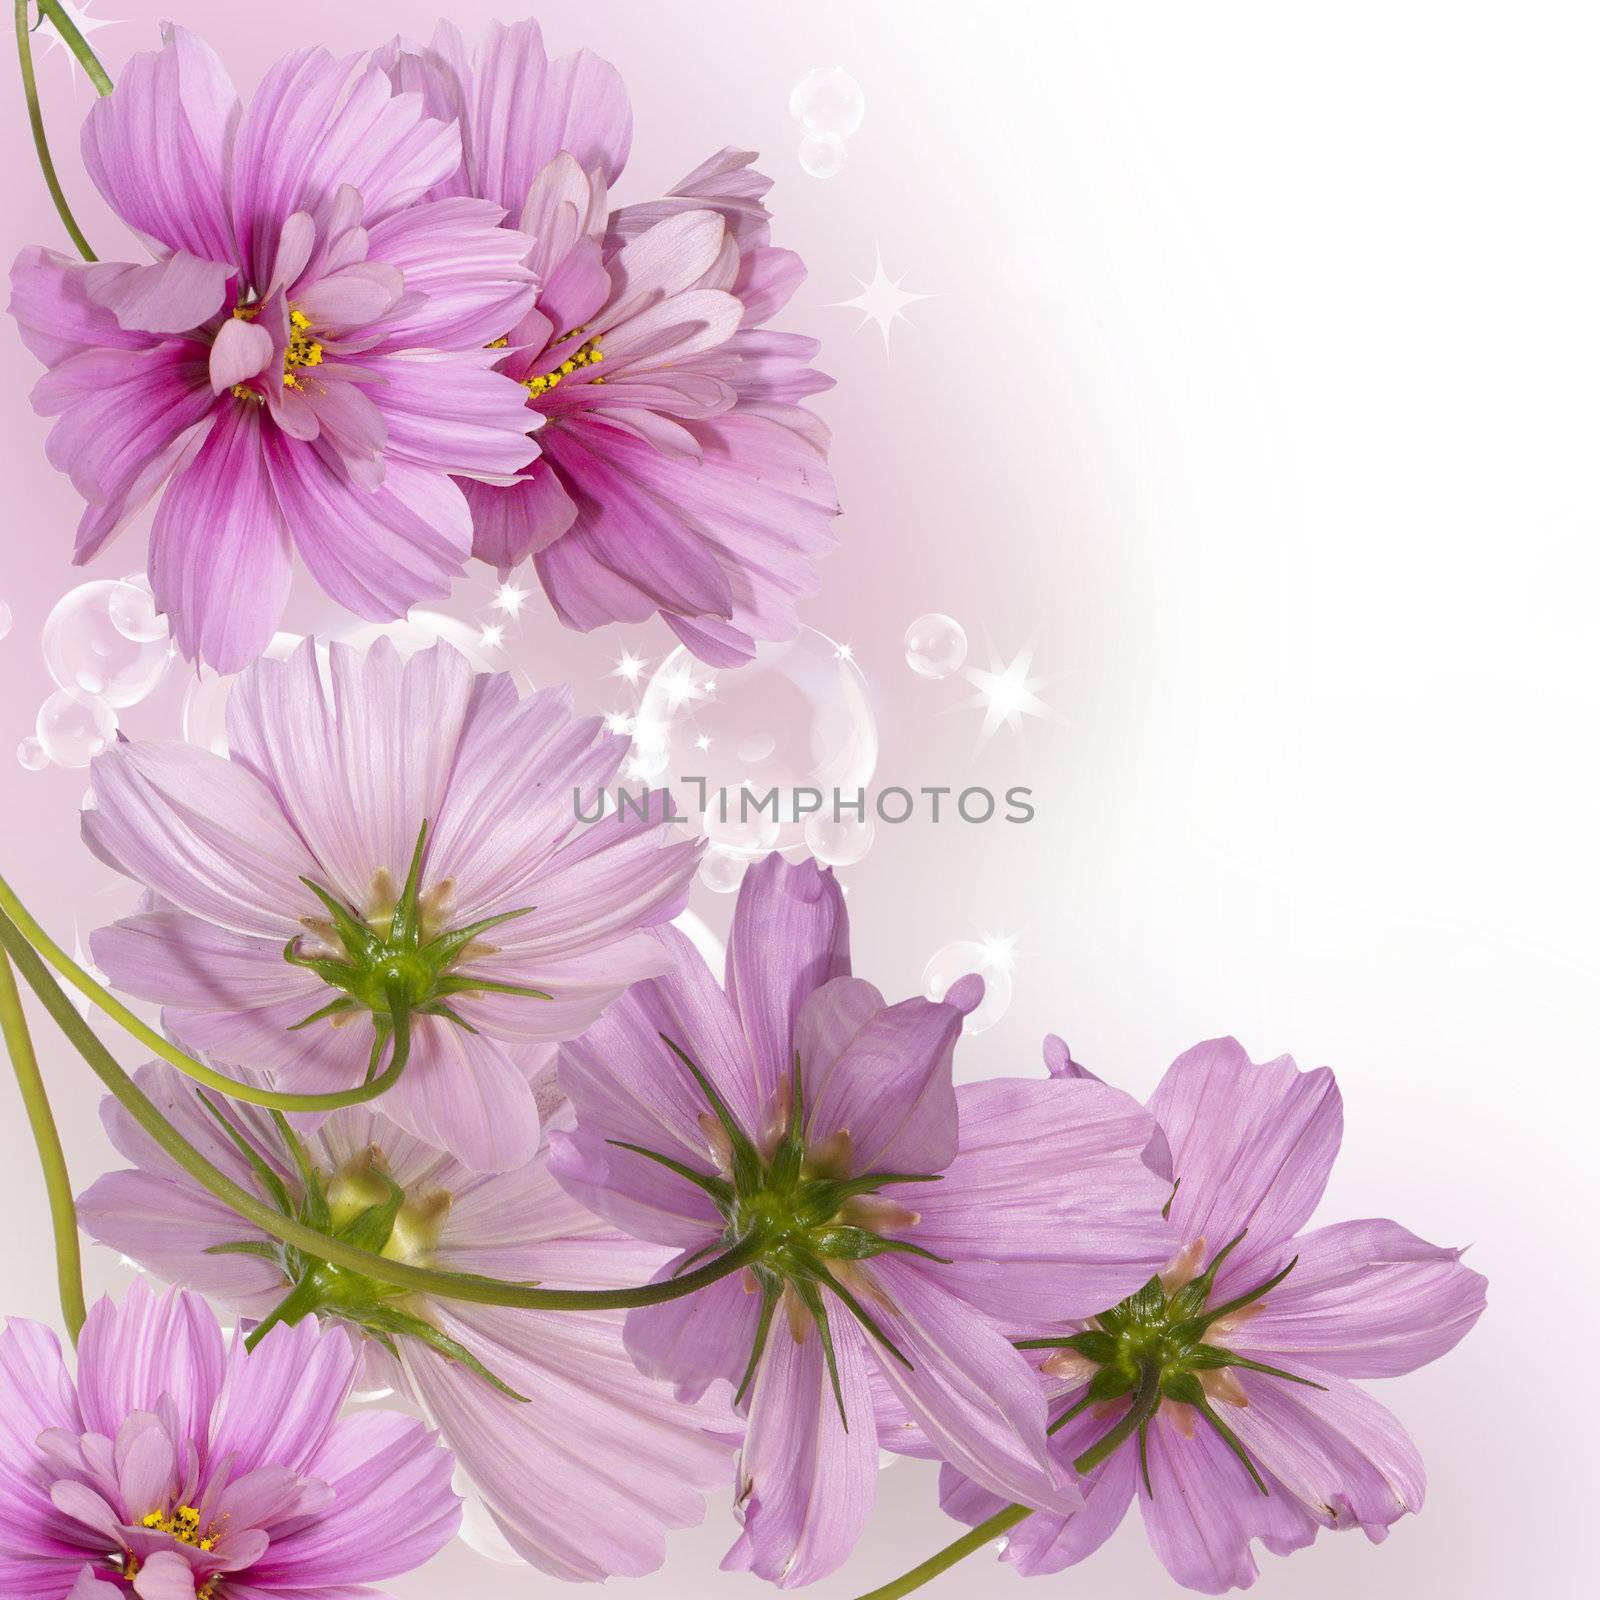 Decorative beautiful dark pink flowers on a abstract blur background